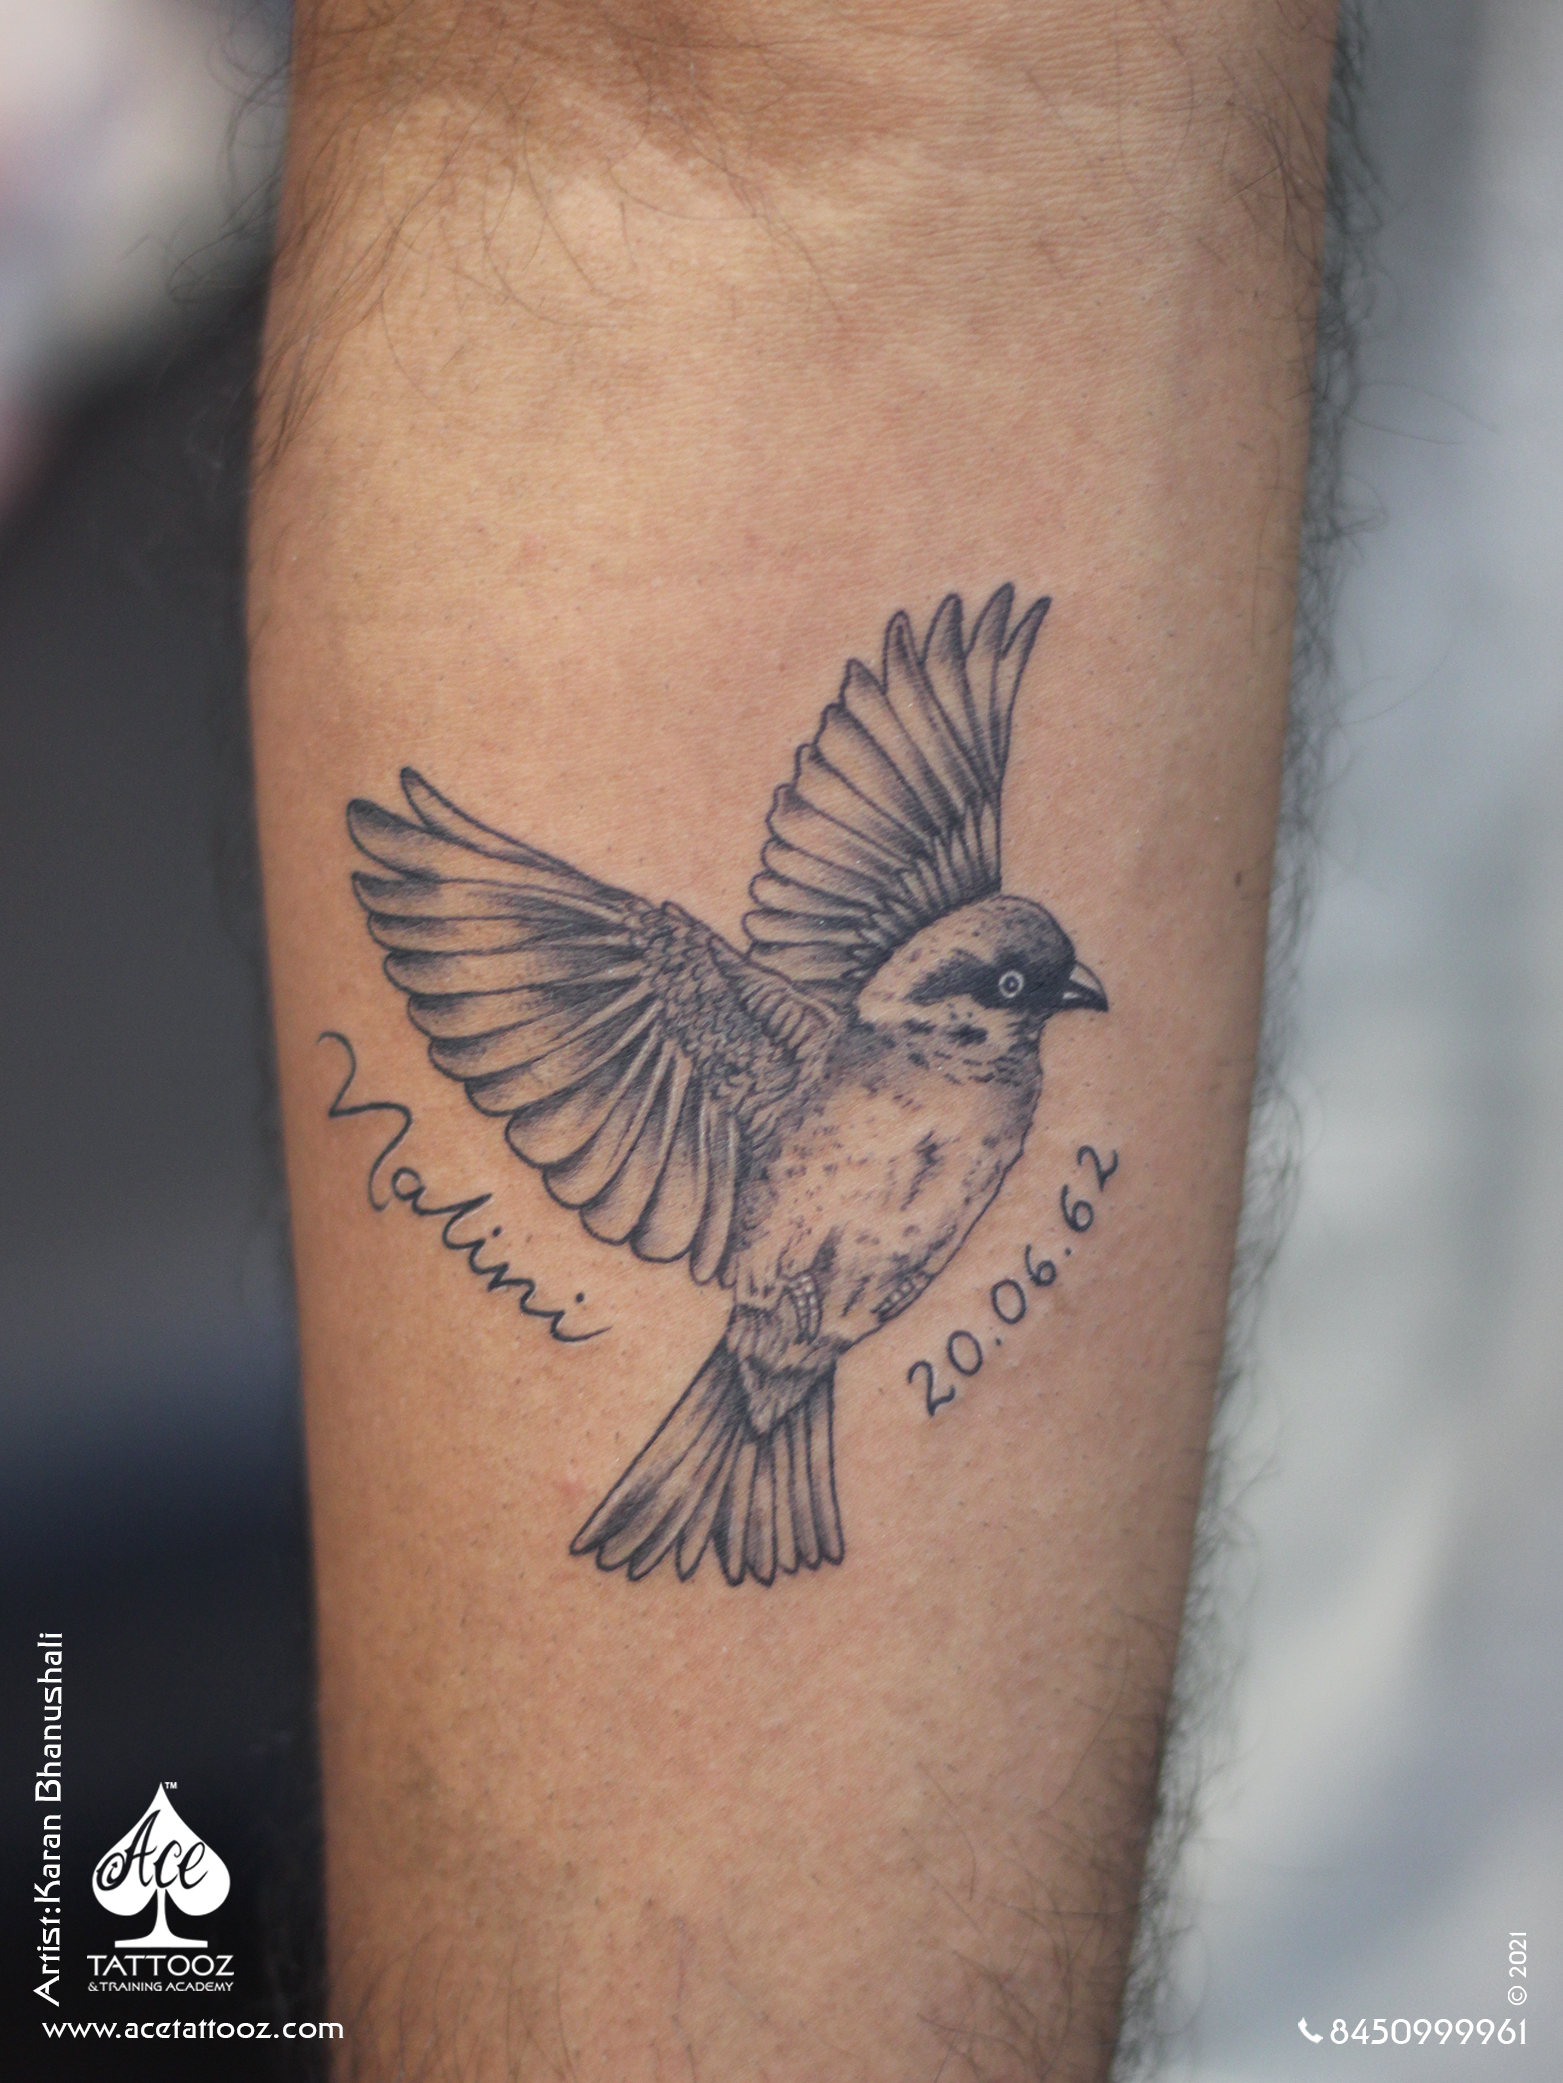 A tattoo of angel wings that shows the popular feathered form for angel  wings in tattoo art | Ratta Tattoo